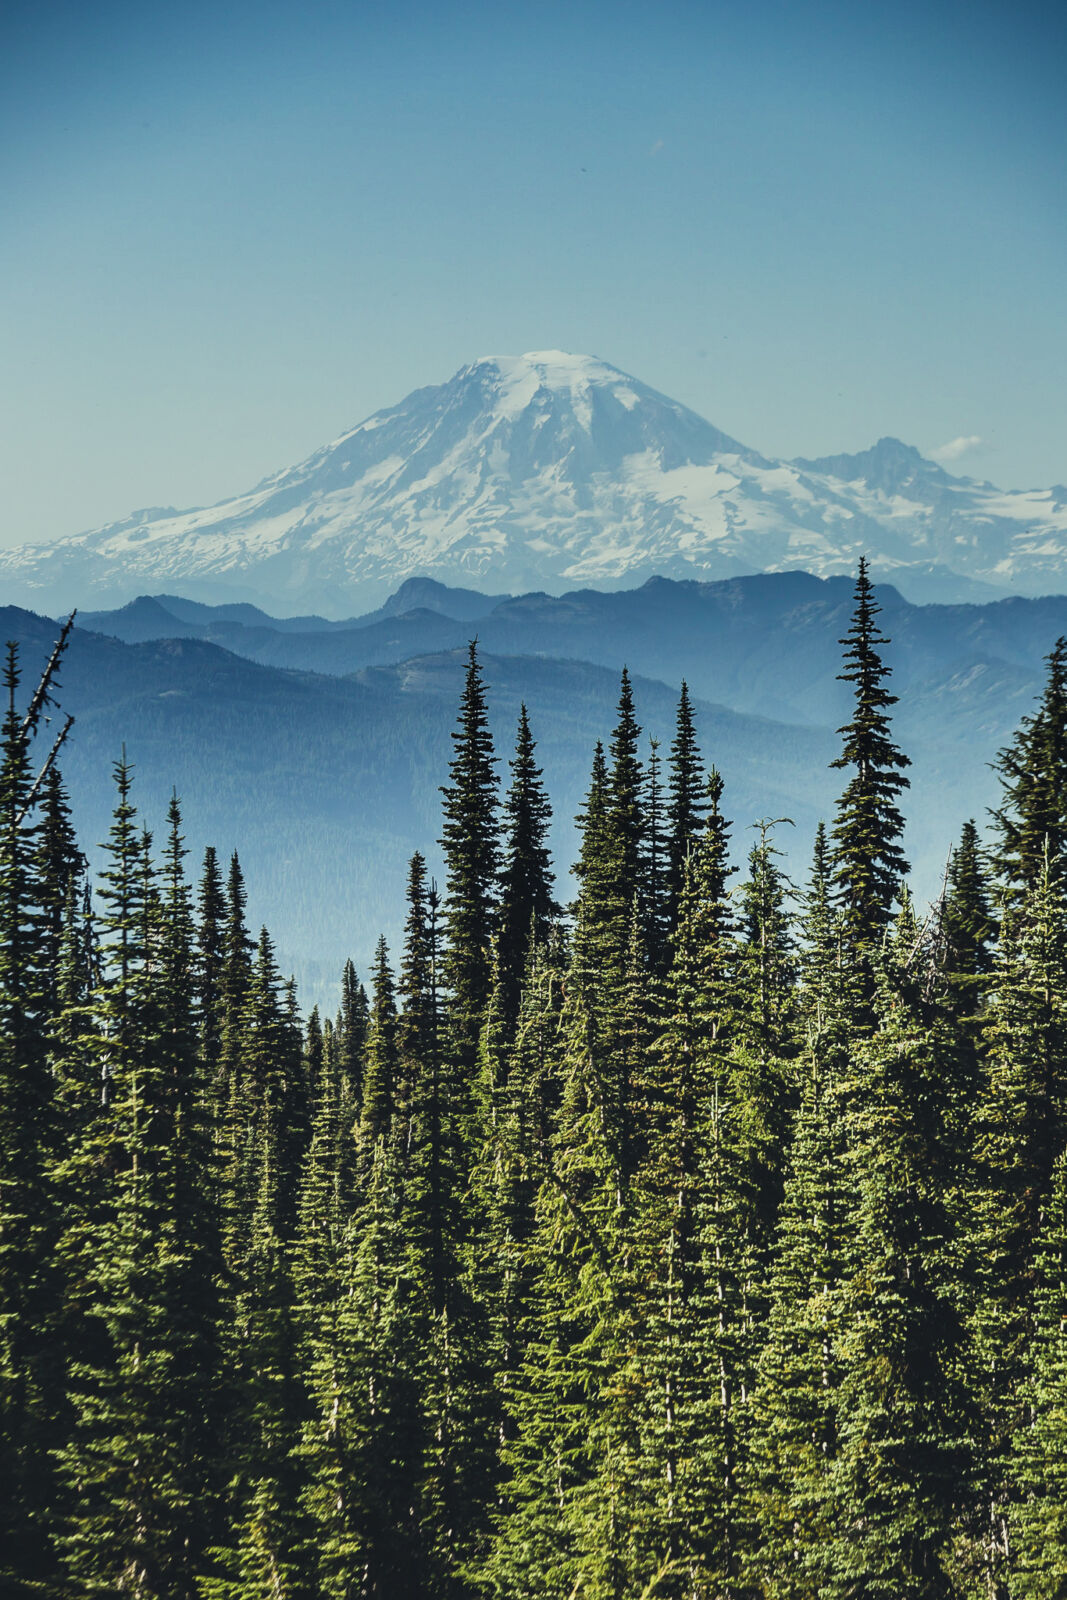 Hiking the Pacific Crest Trail around Mount Adams on the Gifford Pinchot  National Forest - National Forest Foundation